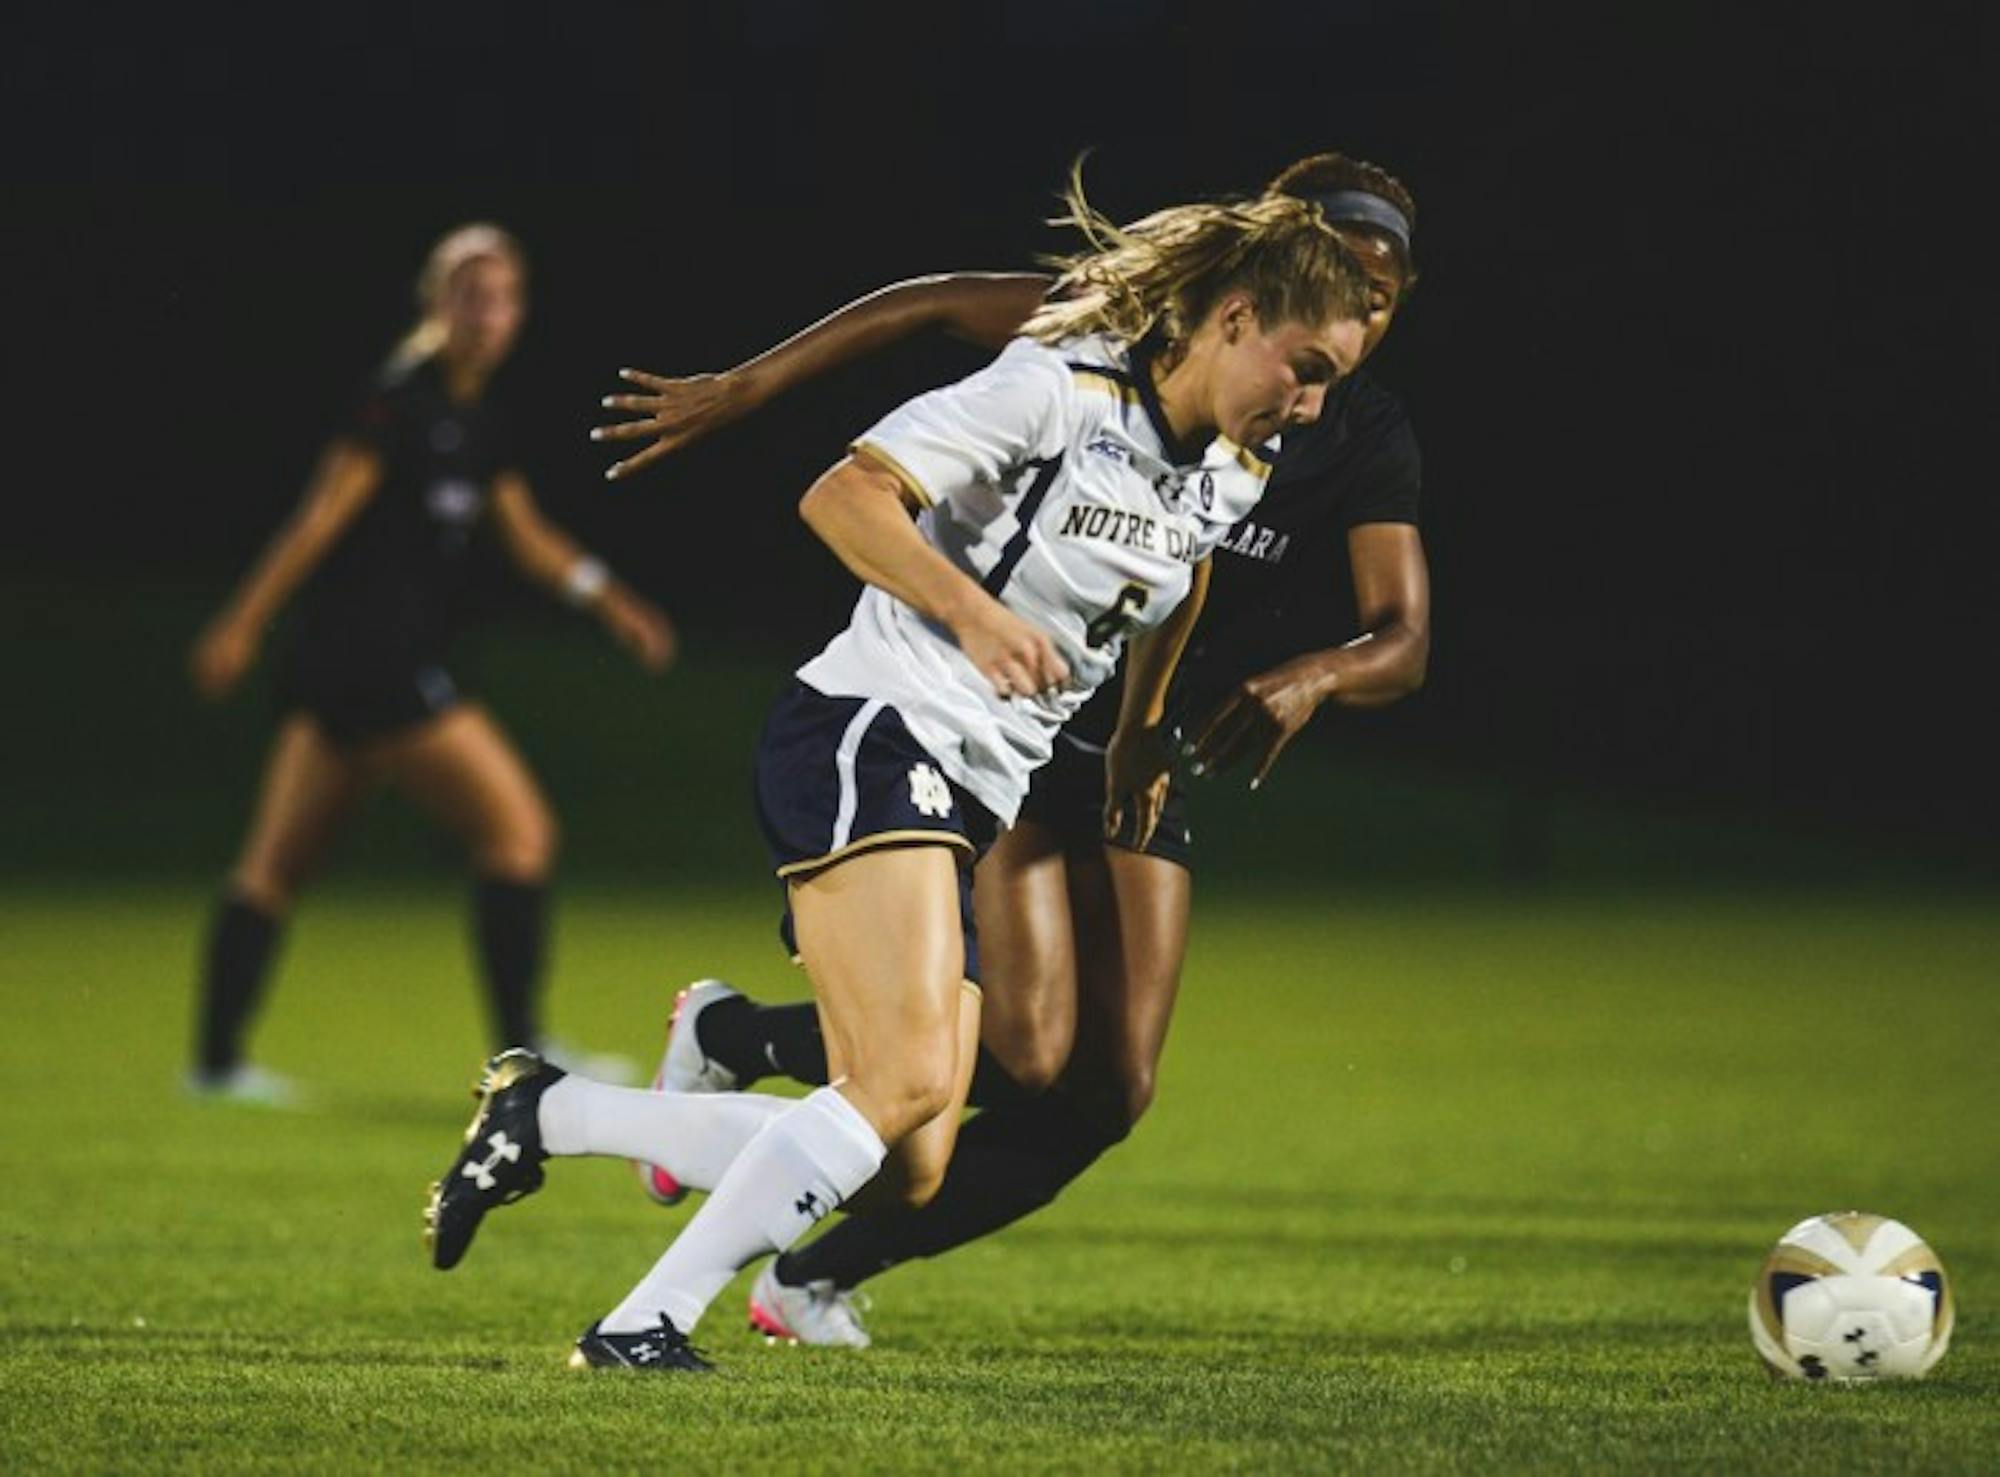 Senior forward Anna Maria Gilberston dribbles away from a defender during Notre Dame’s 2-1 victory over Santa Clara on Aug. 28 at Alumni Stadium. Gilbertson had two goals in Friday’s win against Virginia Tech.